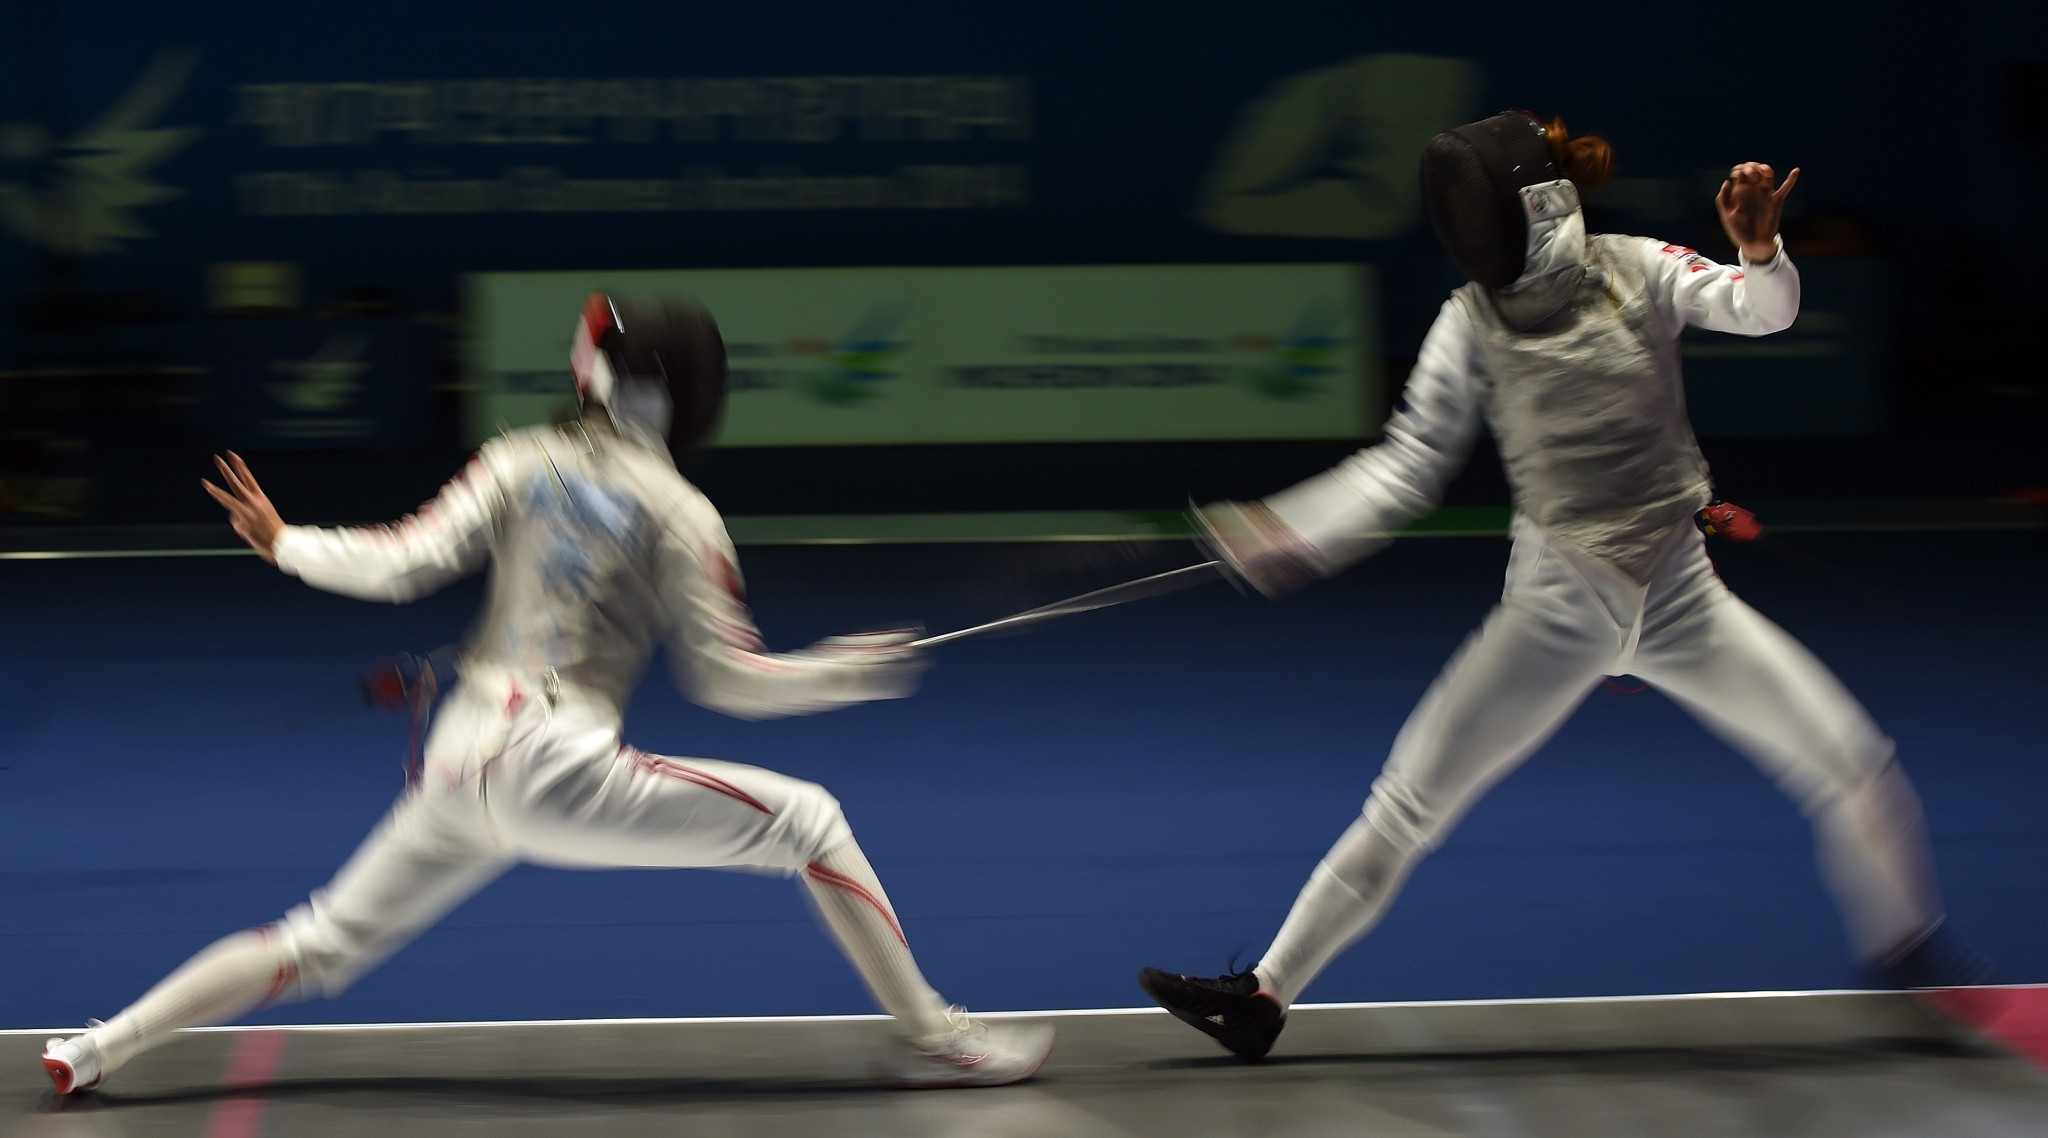 Yanaoka wins through to earn bout with Rio 2016 champion Deriglazova at FIE Women's Foil World Cup in Germany